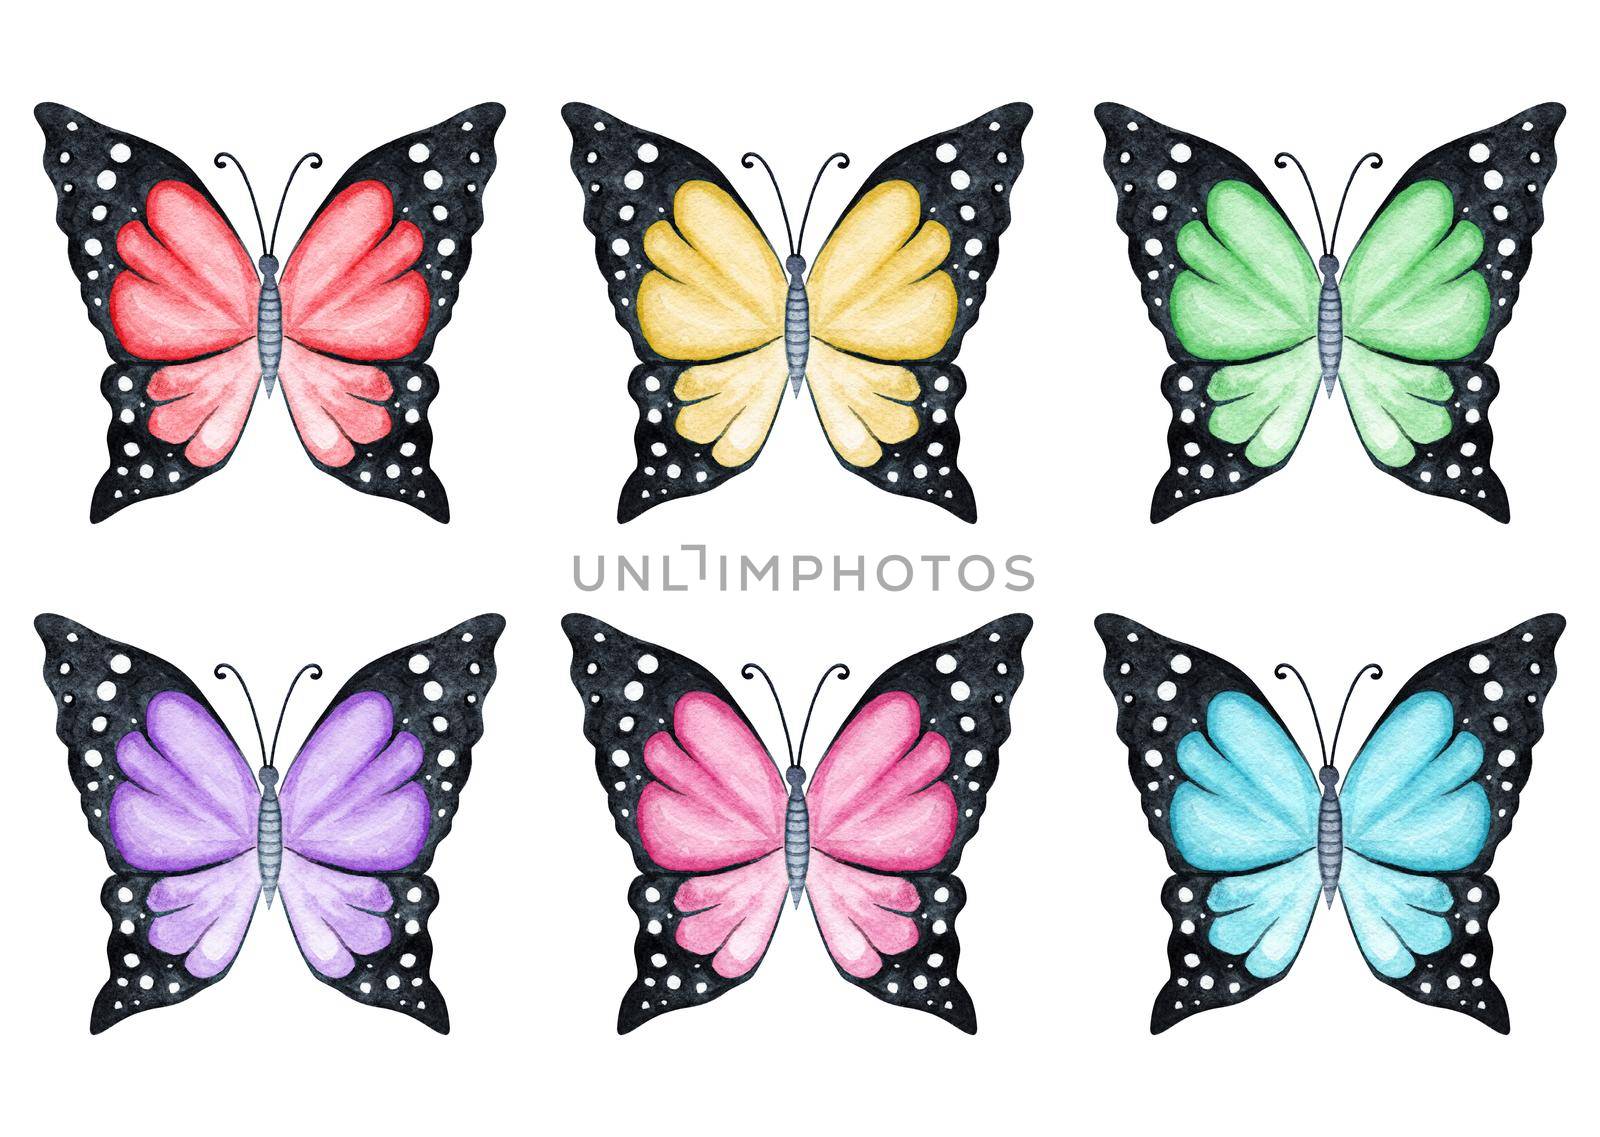 Watercolor colored butterflies set isolated on white background